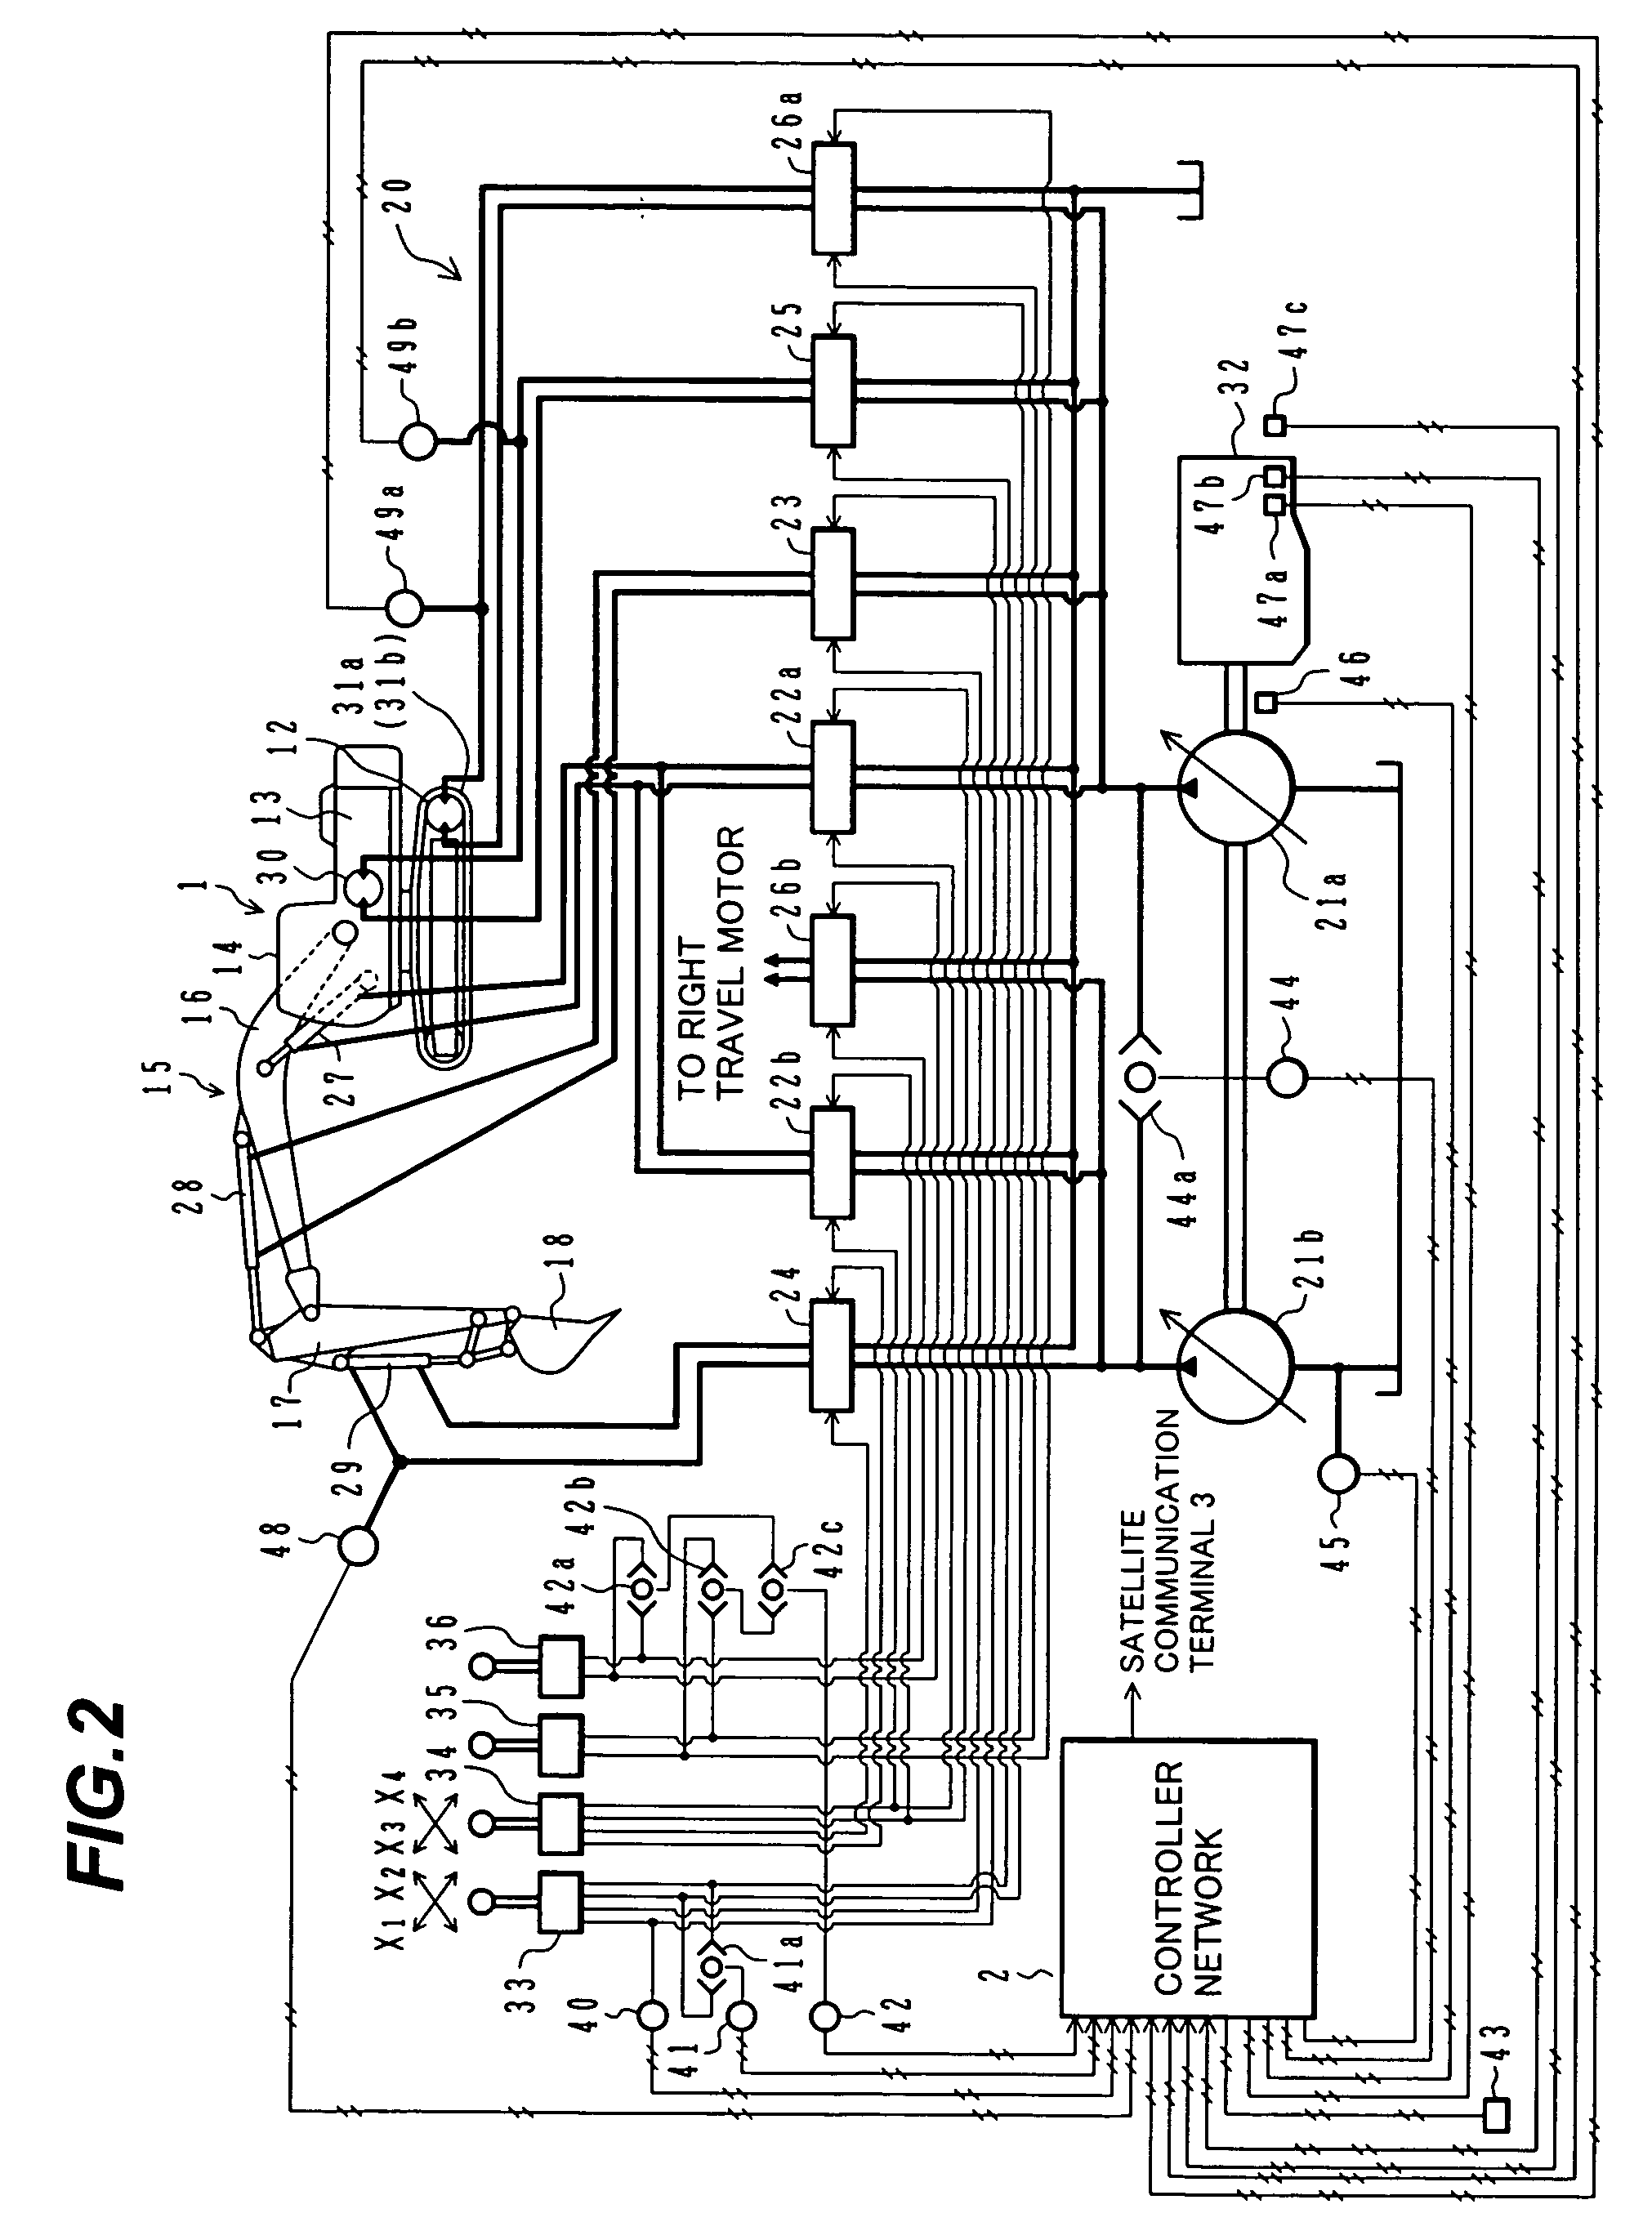 Operation information control device and system for a construction machine